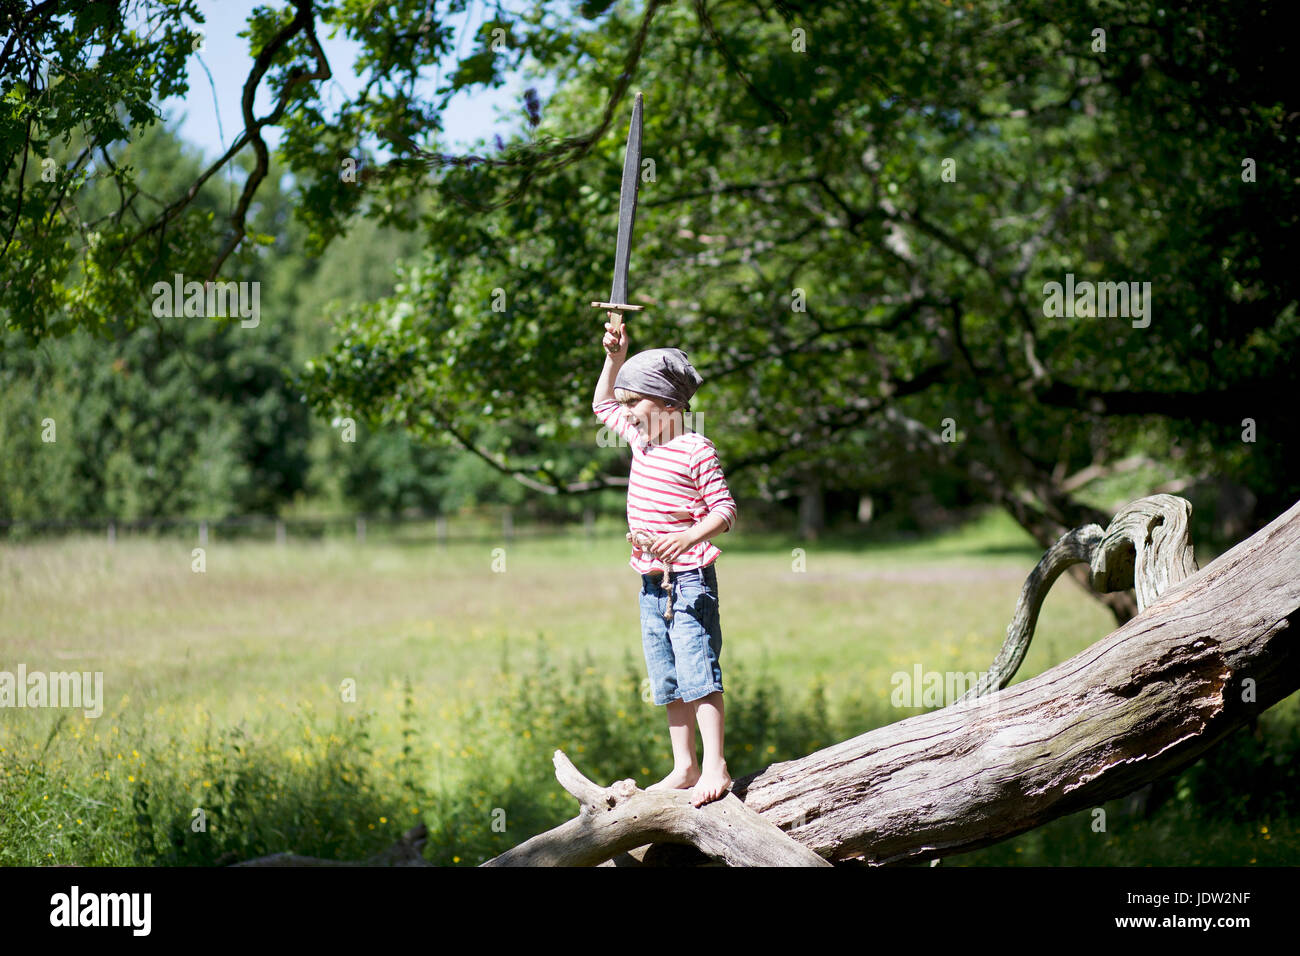 Boy in pirate costume playing on tree Stock Photo